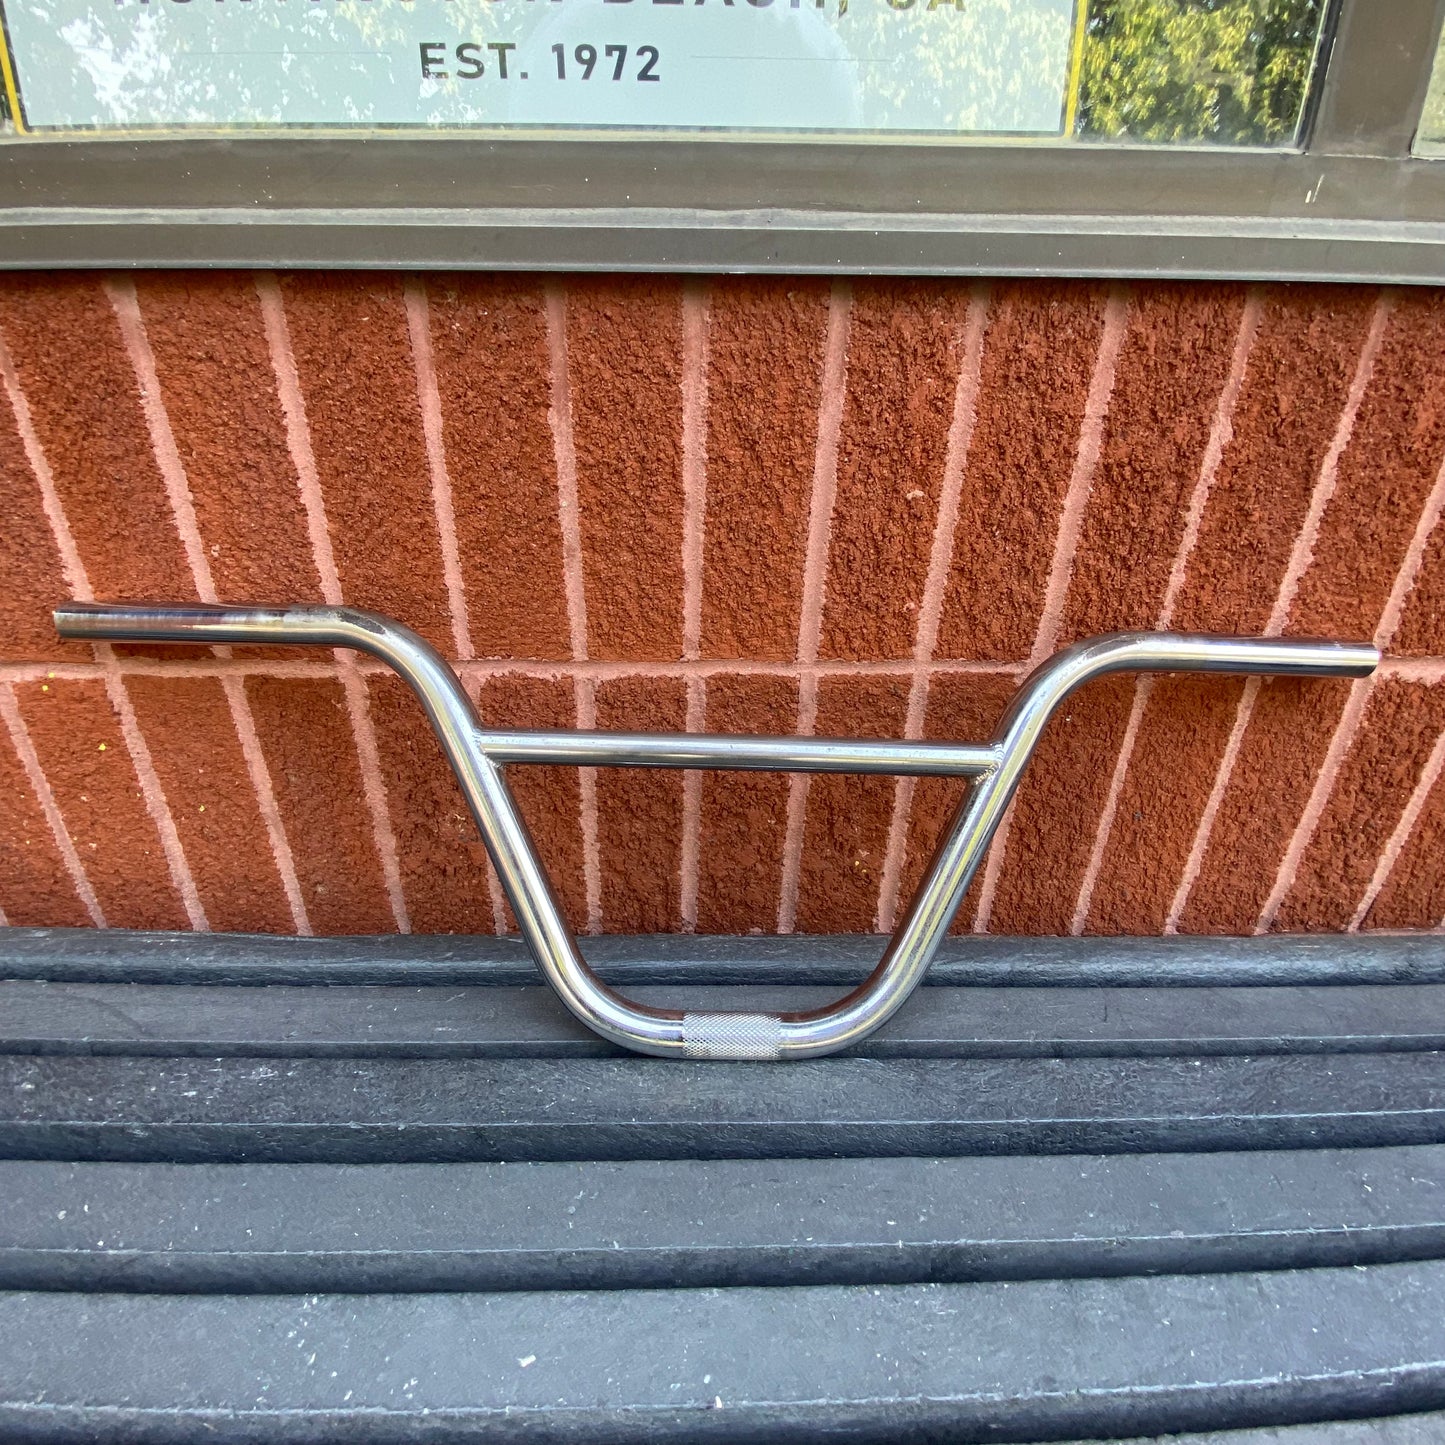 Used Fit Skyhigh Bars 8.25” Made In USA